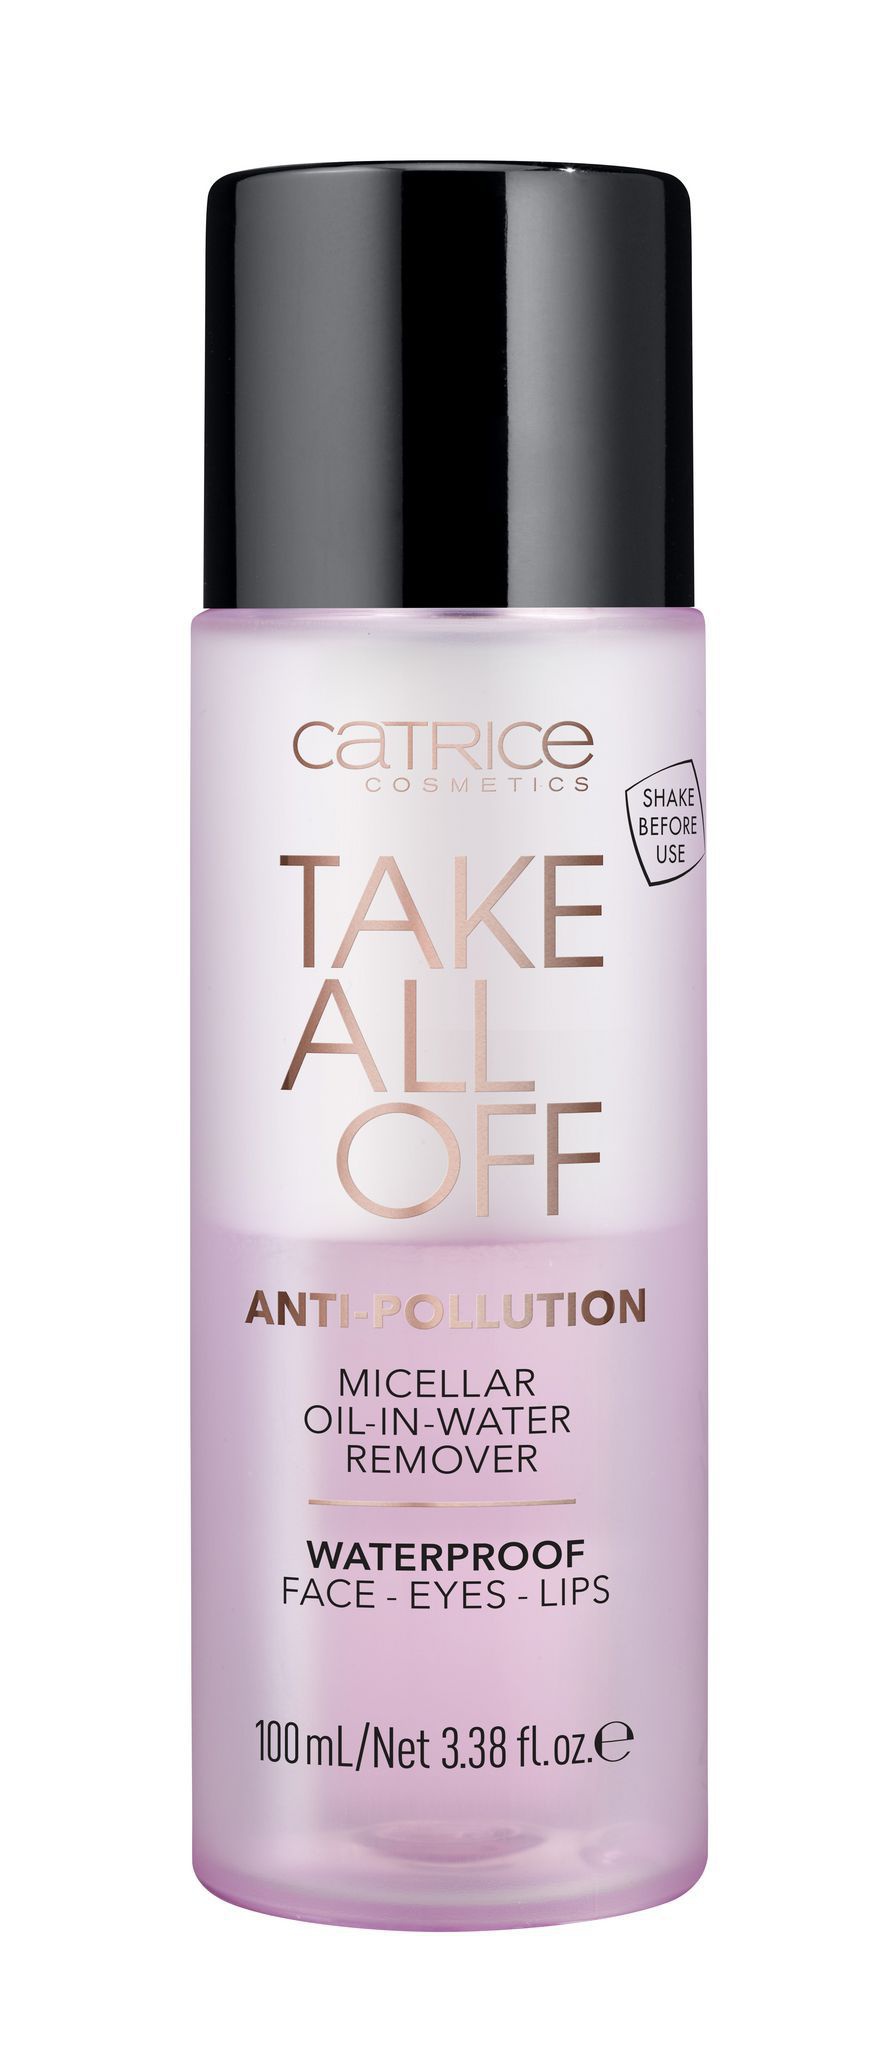 Мицеллярная вода двухфазная с маслами Take All Off Anti-Pollution Micellar Oil-in-Water Remove Catrice